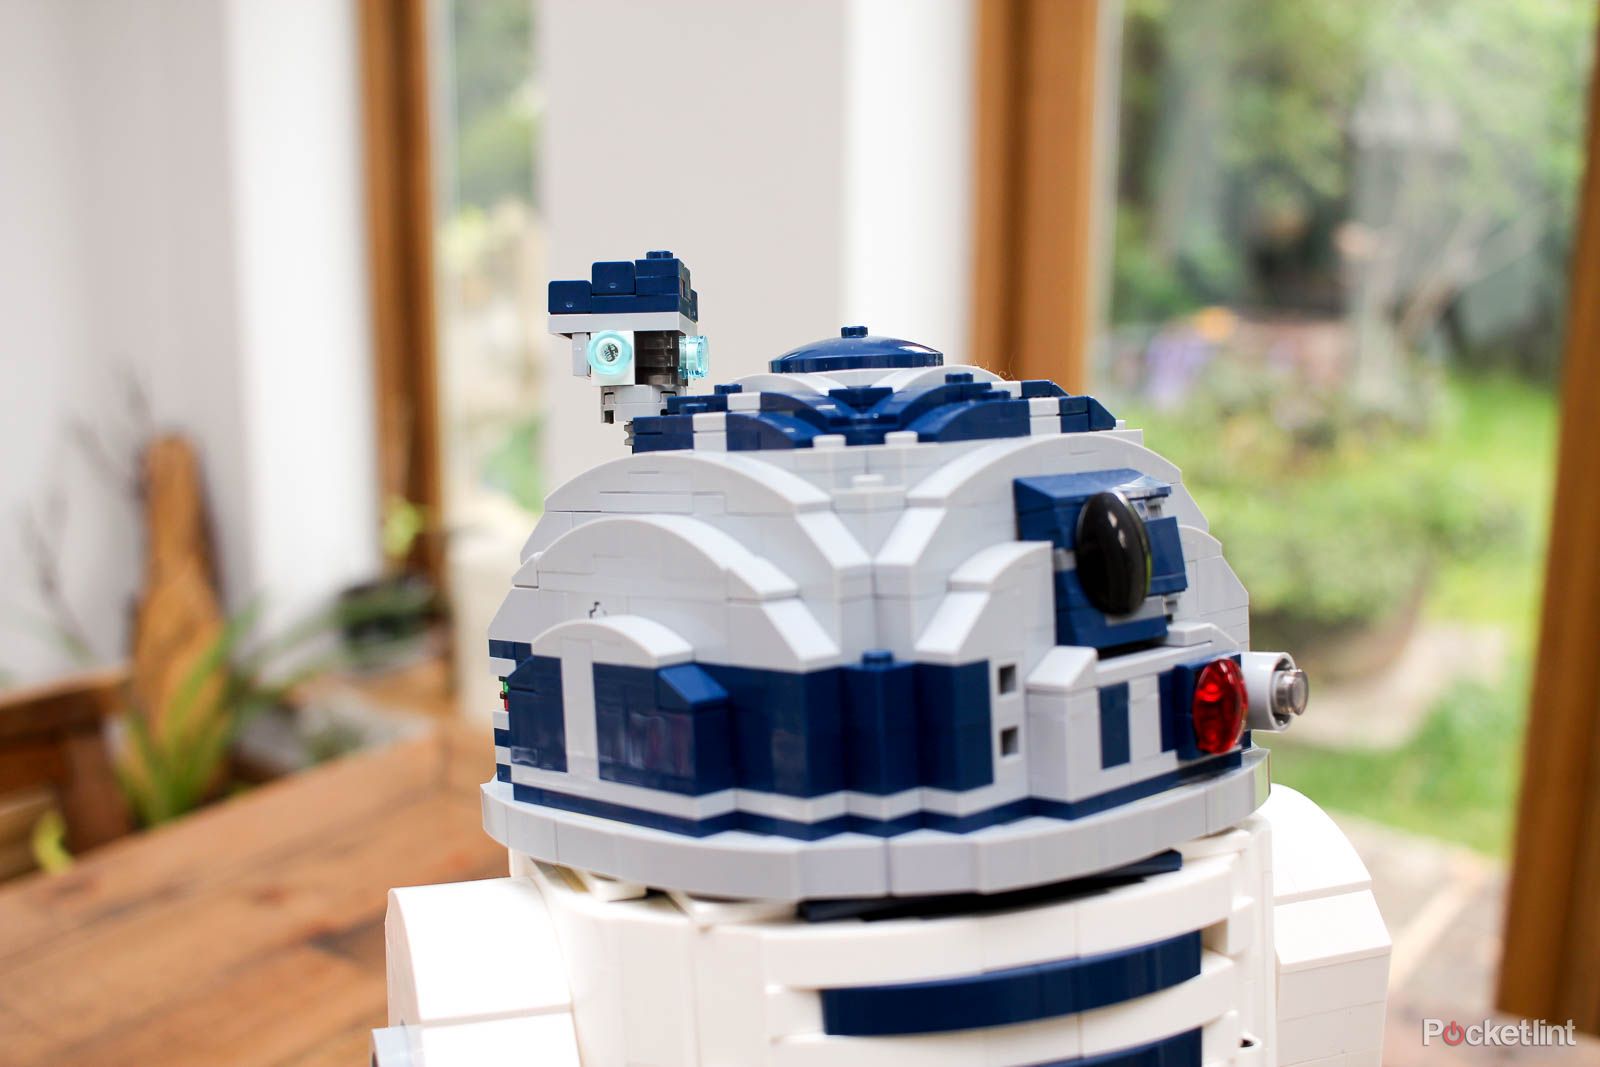 Lego R2-D2 hands on build pictures photo 12